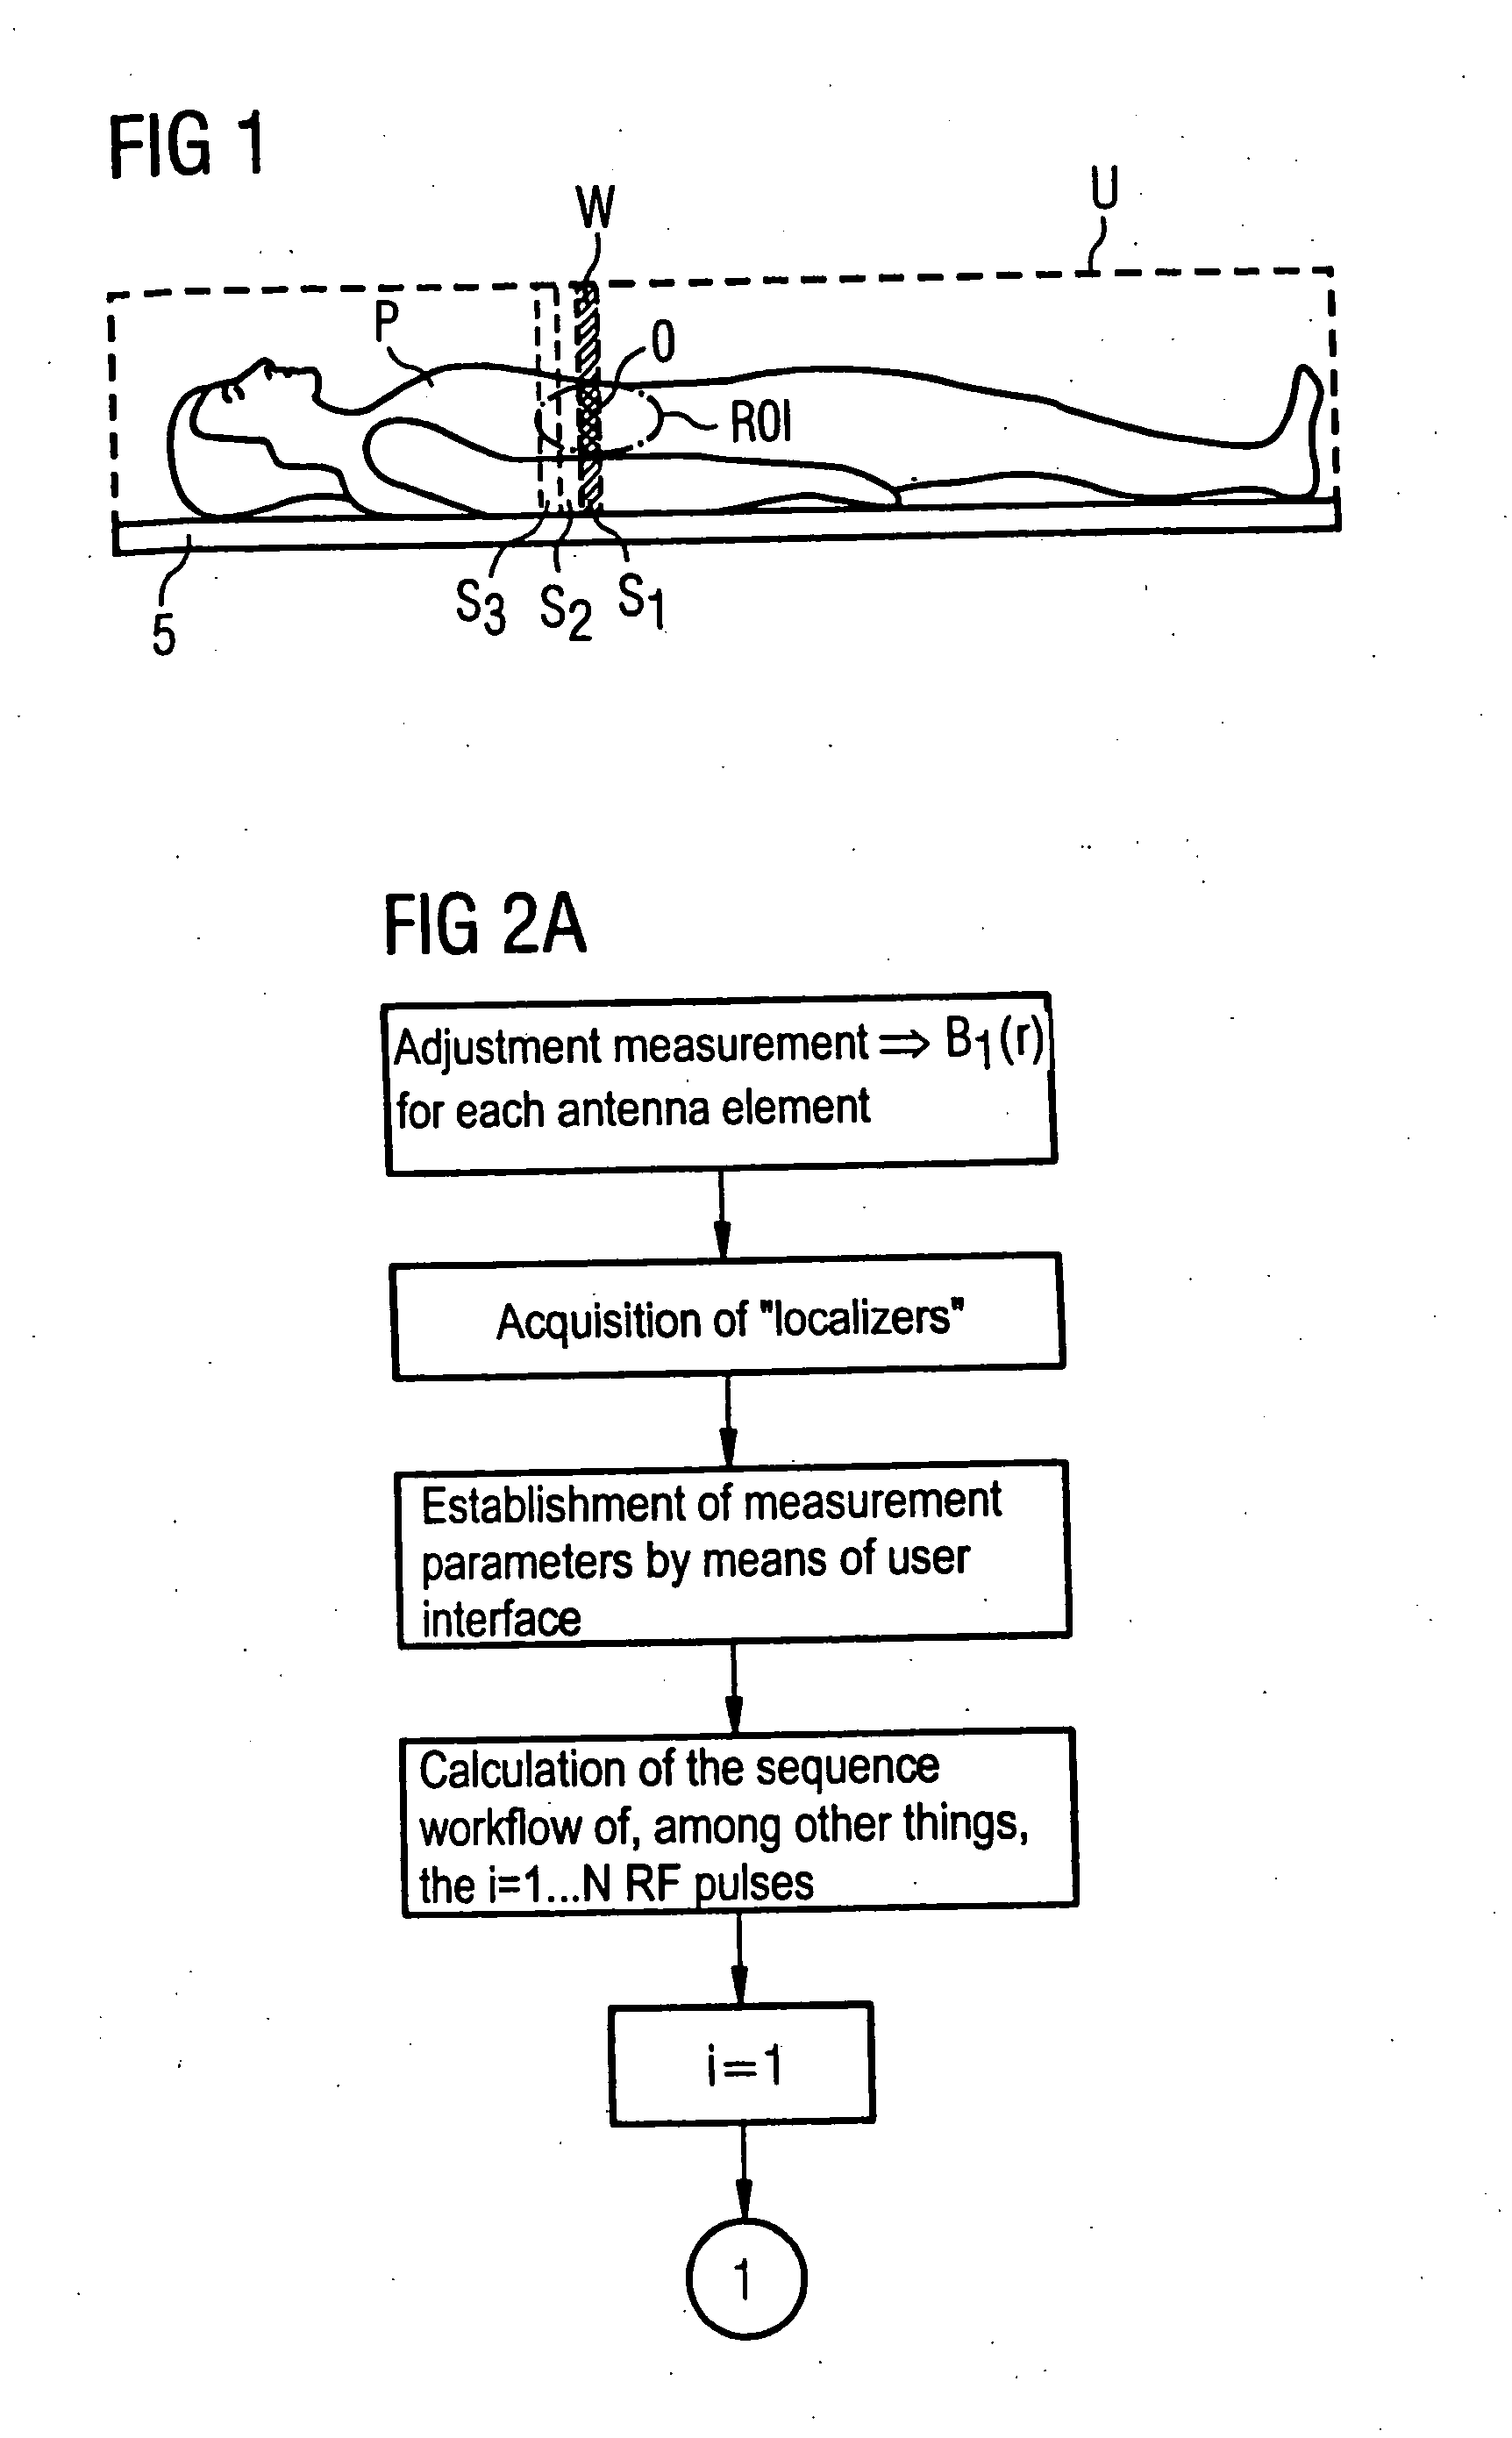 Magnetic resonance system and operating method for RF pulse optimization